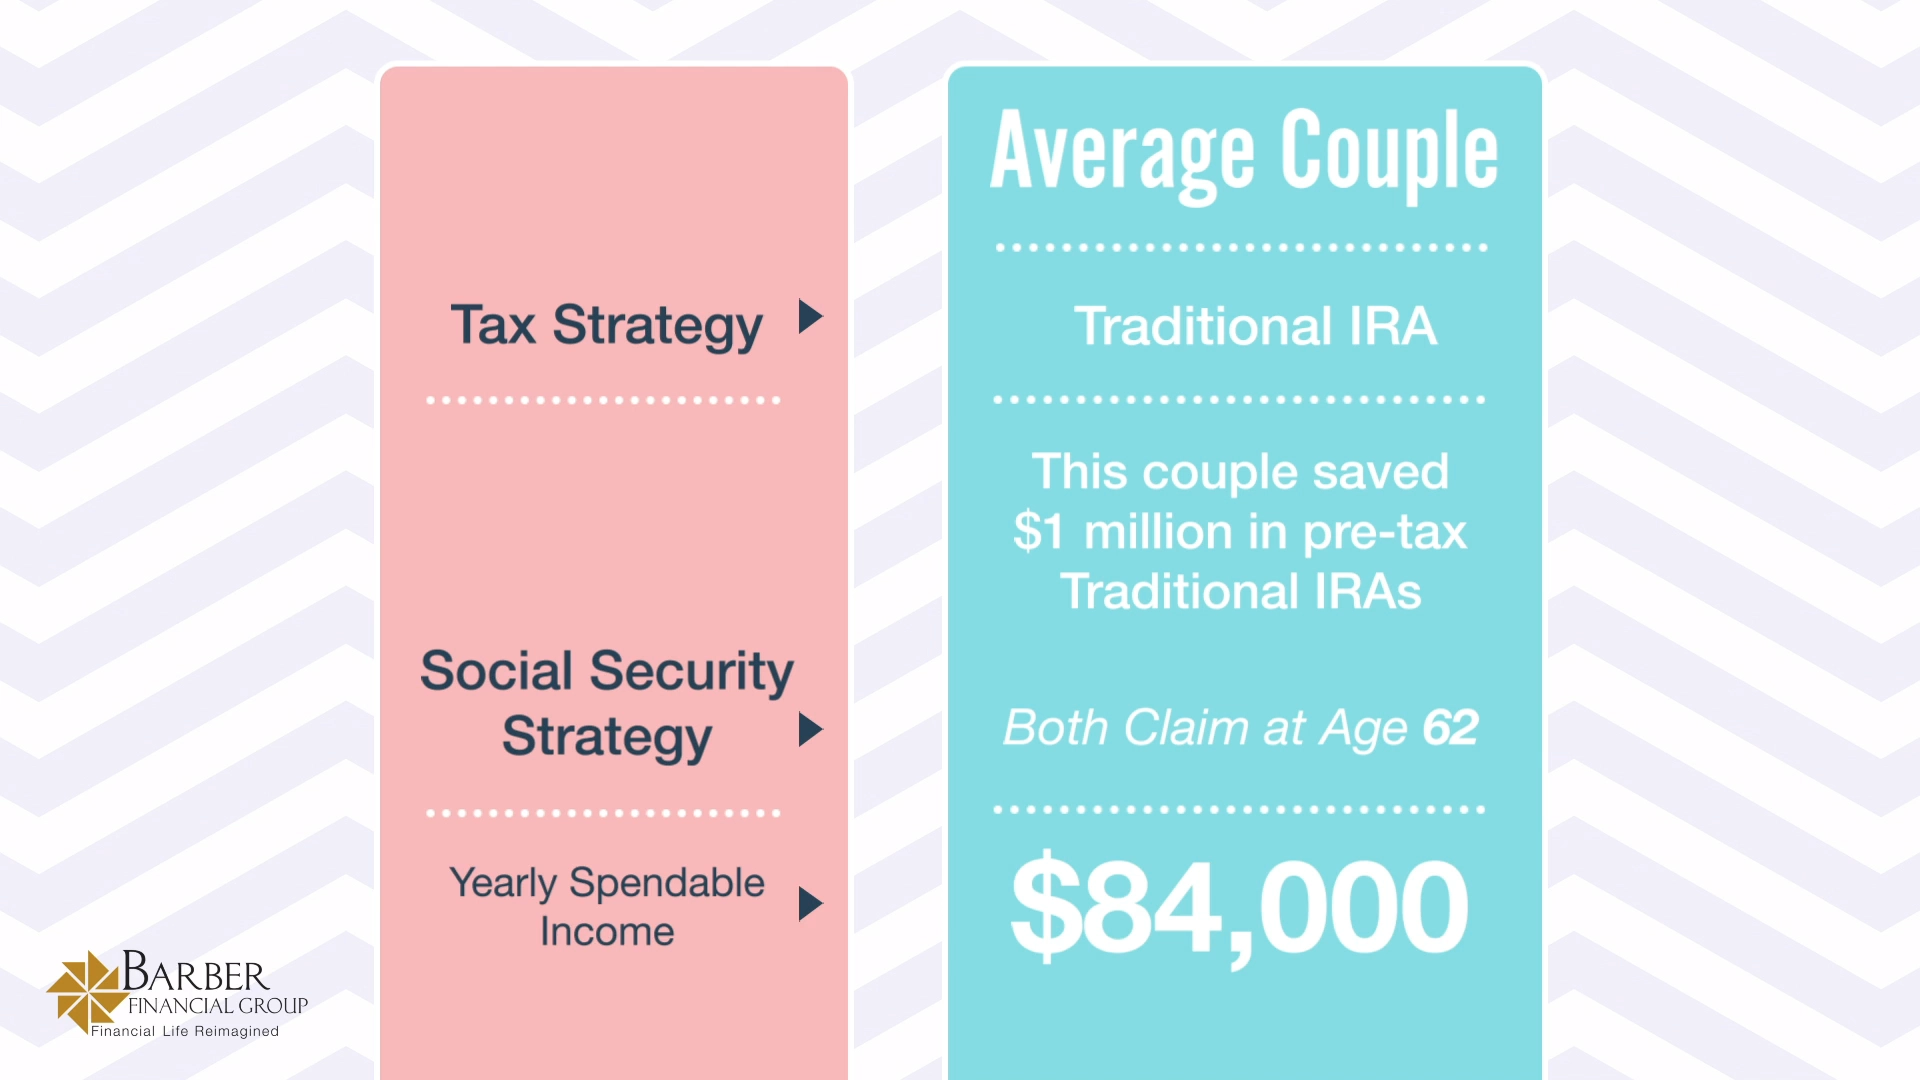 Retiring with $1 Million - The Average Couples Yearly Spendable Income